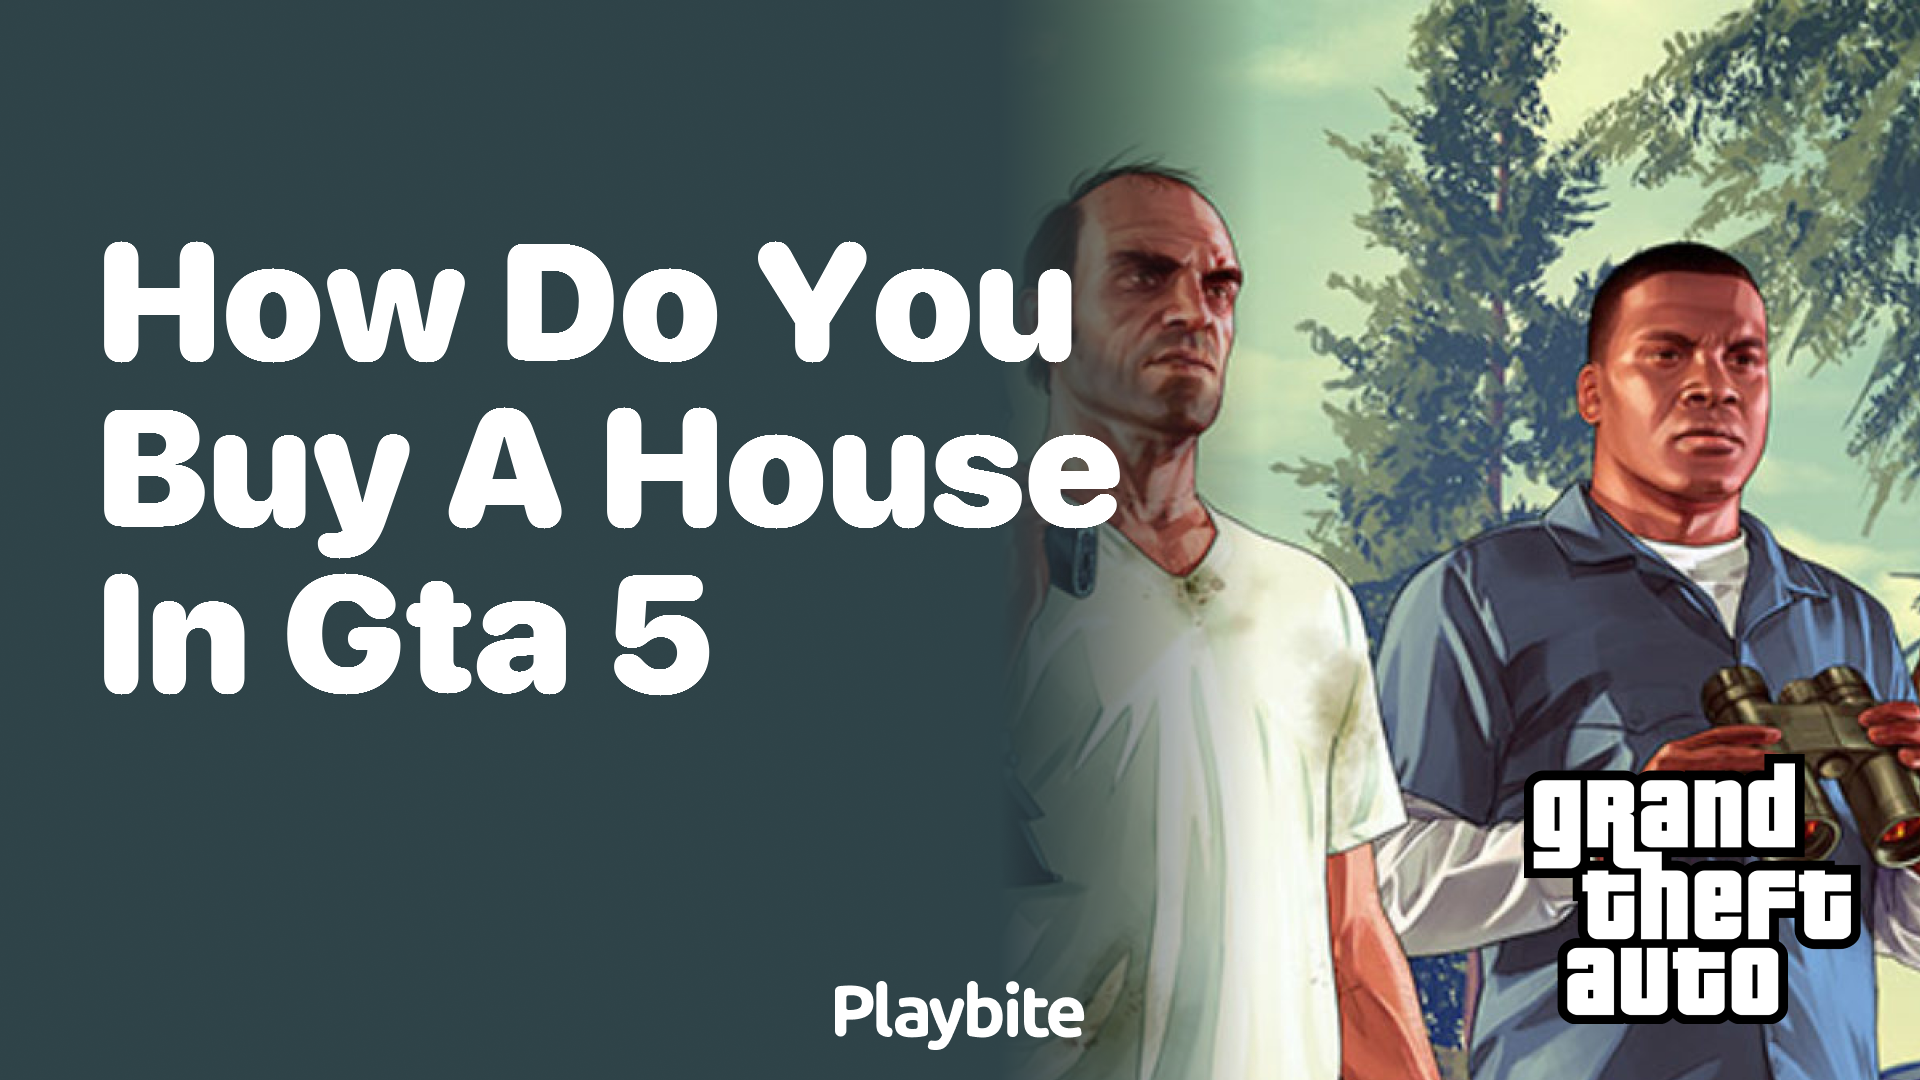 How do you buy a house in GTA 5?